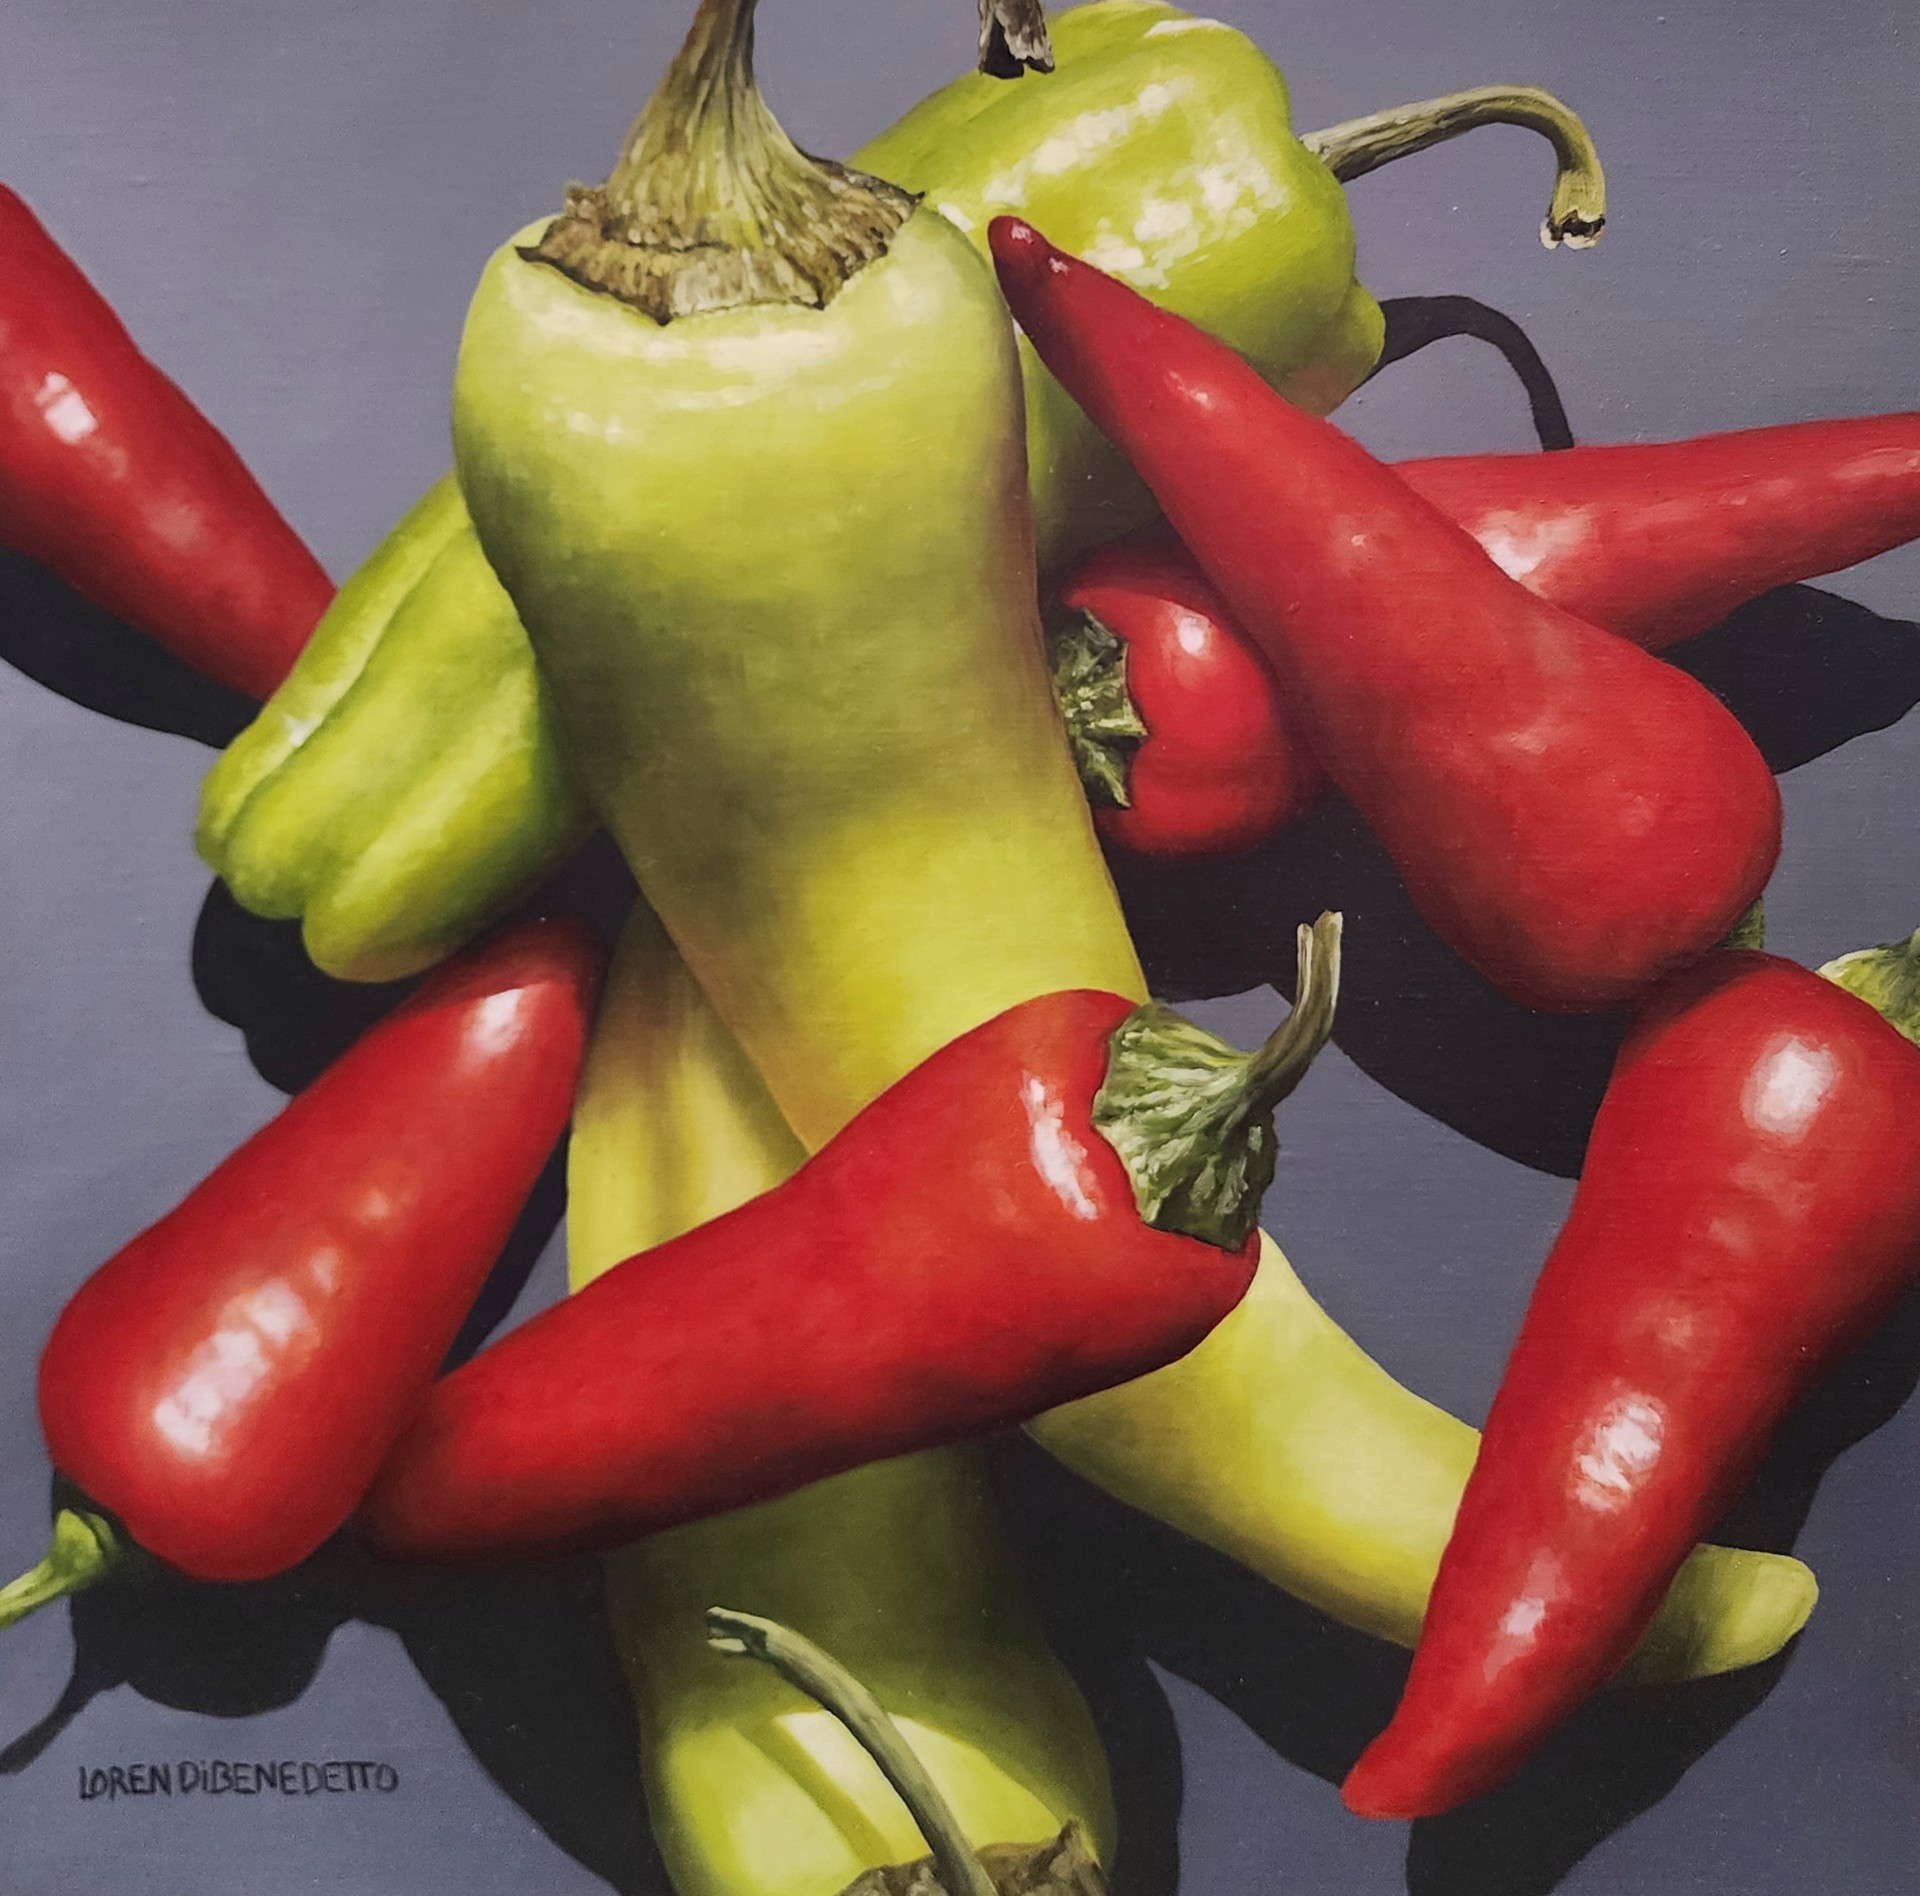 Peppers from Above #1 by Loren DiBenedetto